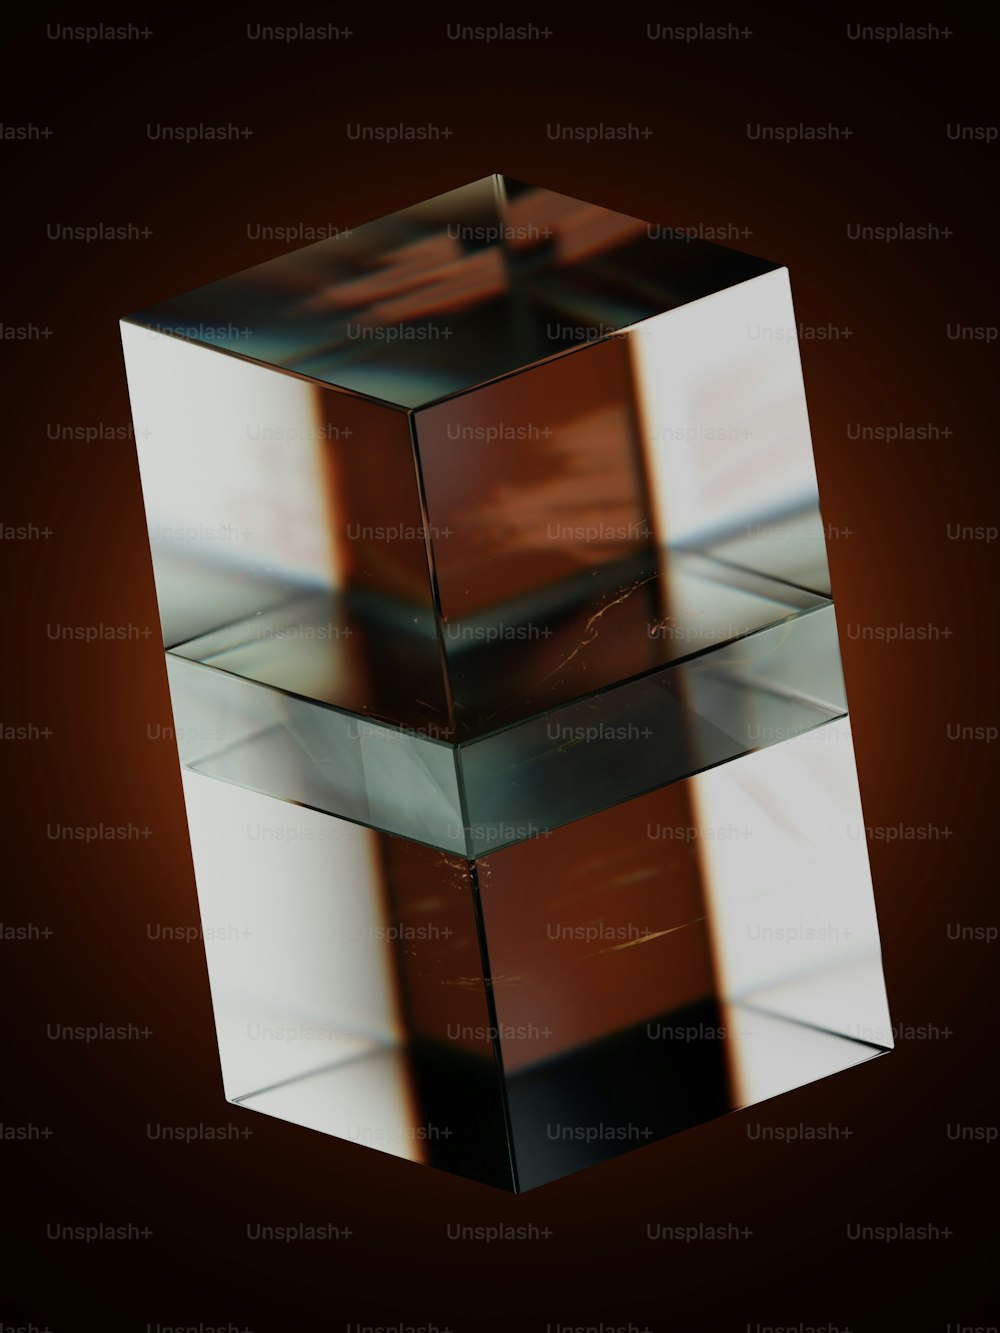 a square object is shown with a blurry background